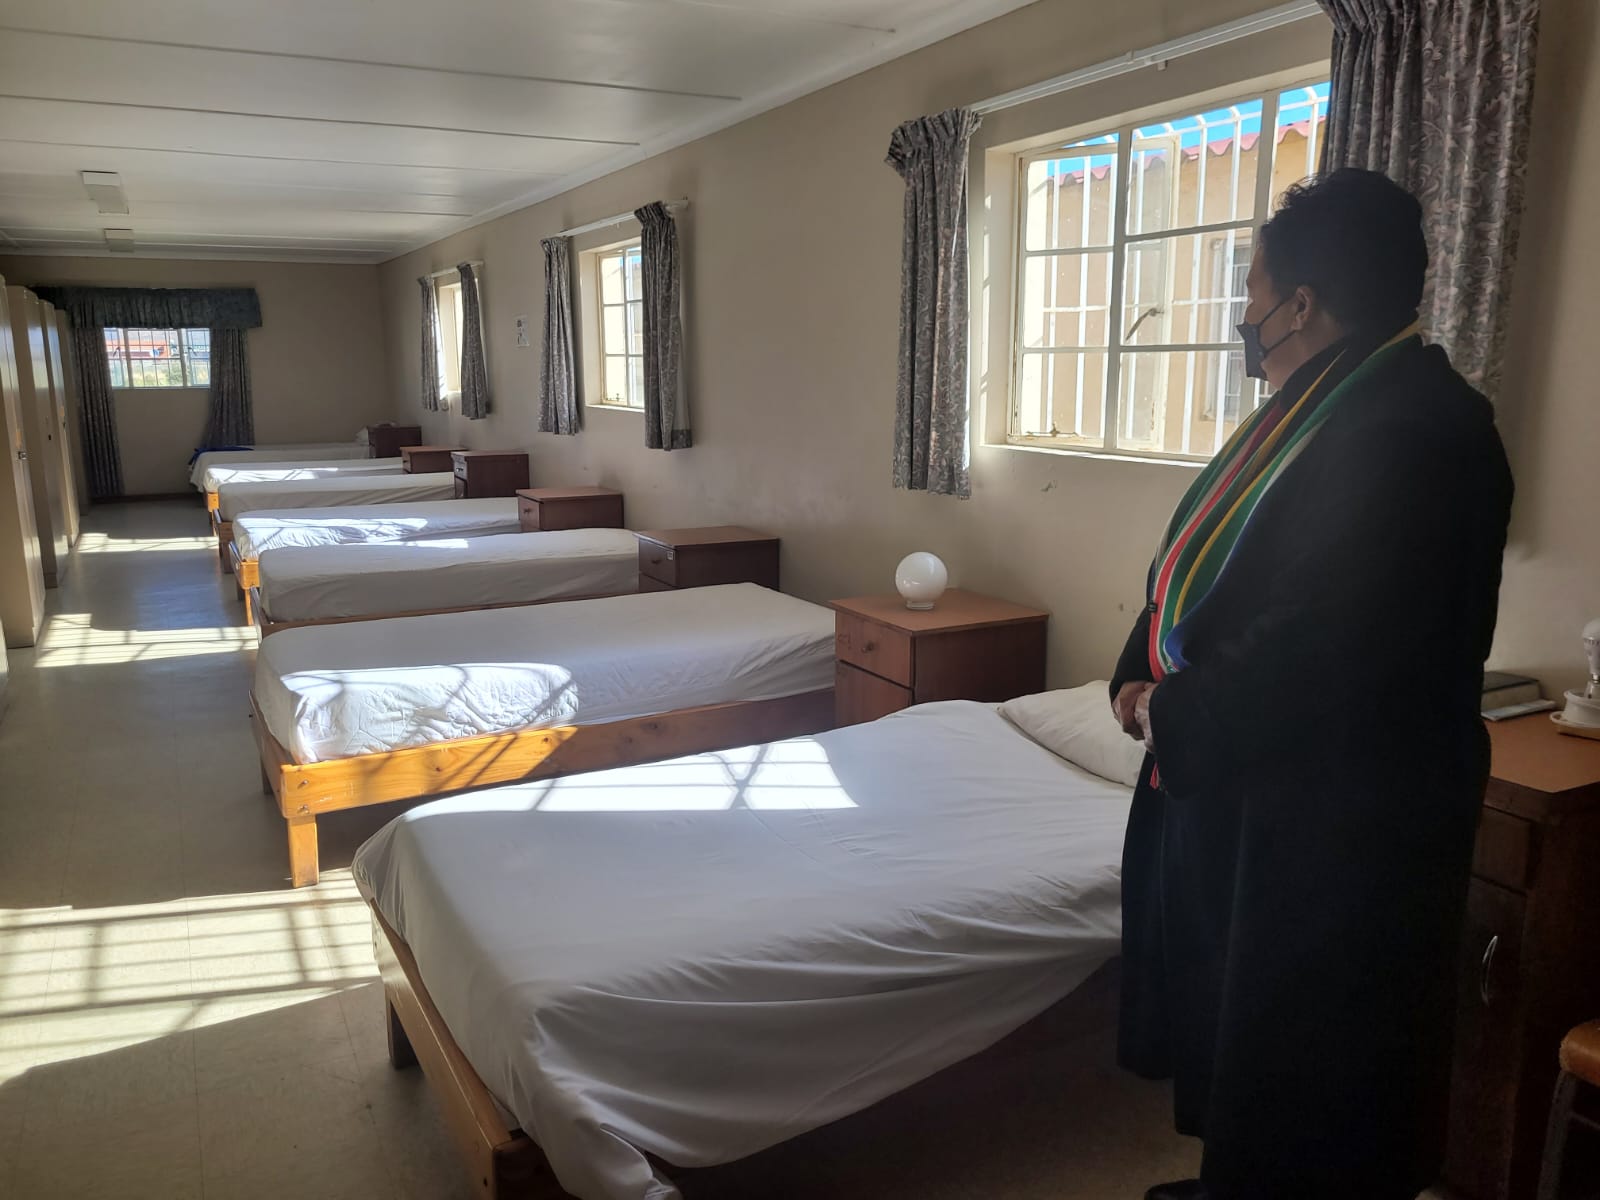 Minister Fernandez in one of the dorm rooms at Toevlug Centre